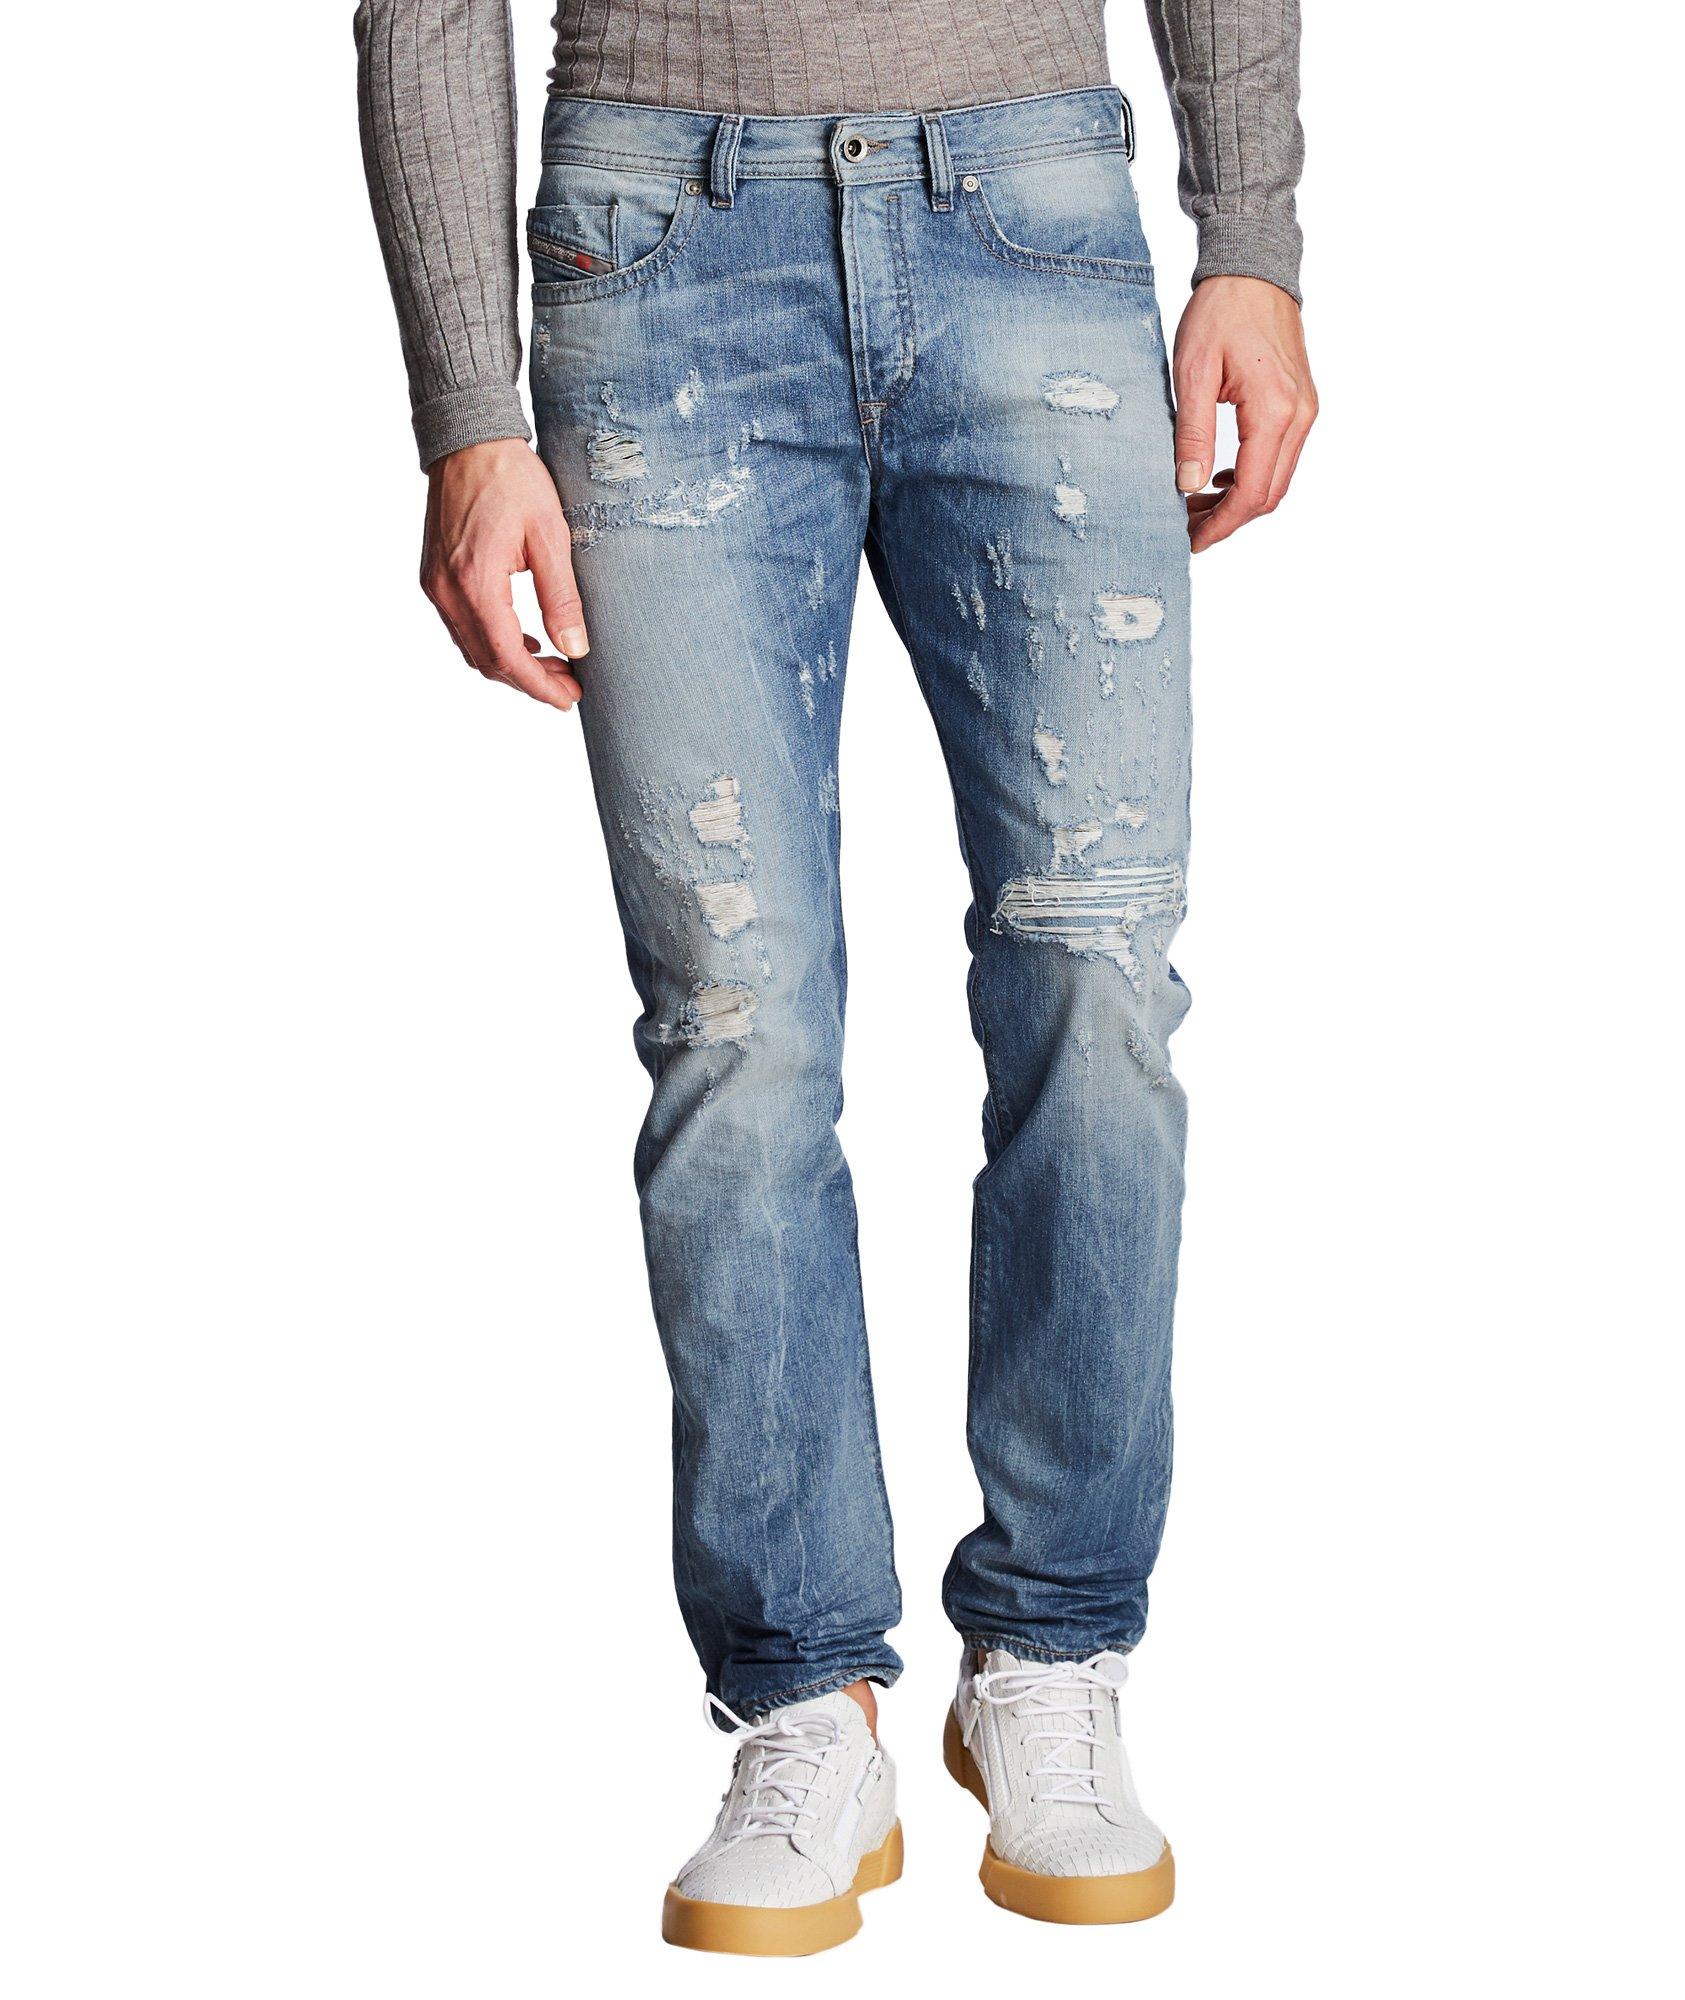 Buster Distressed Jeans image 0